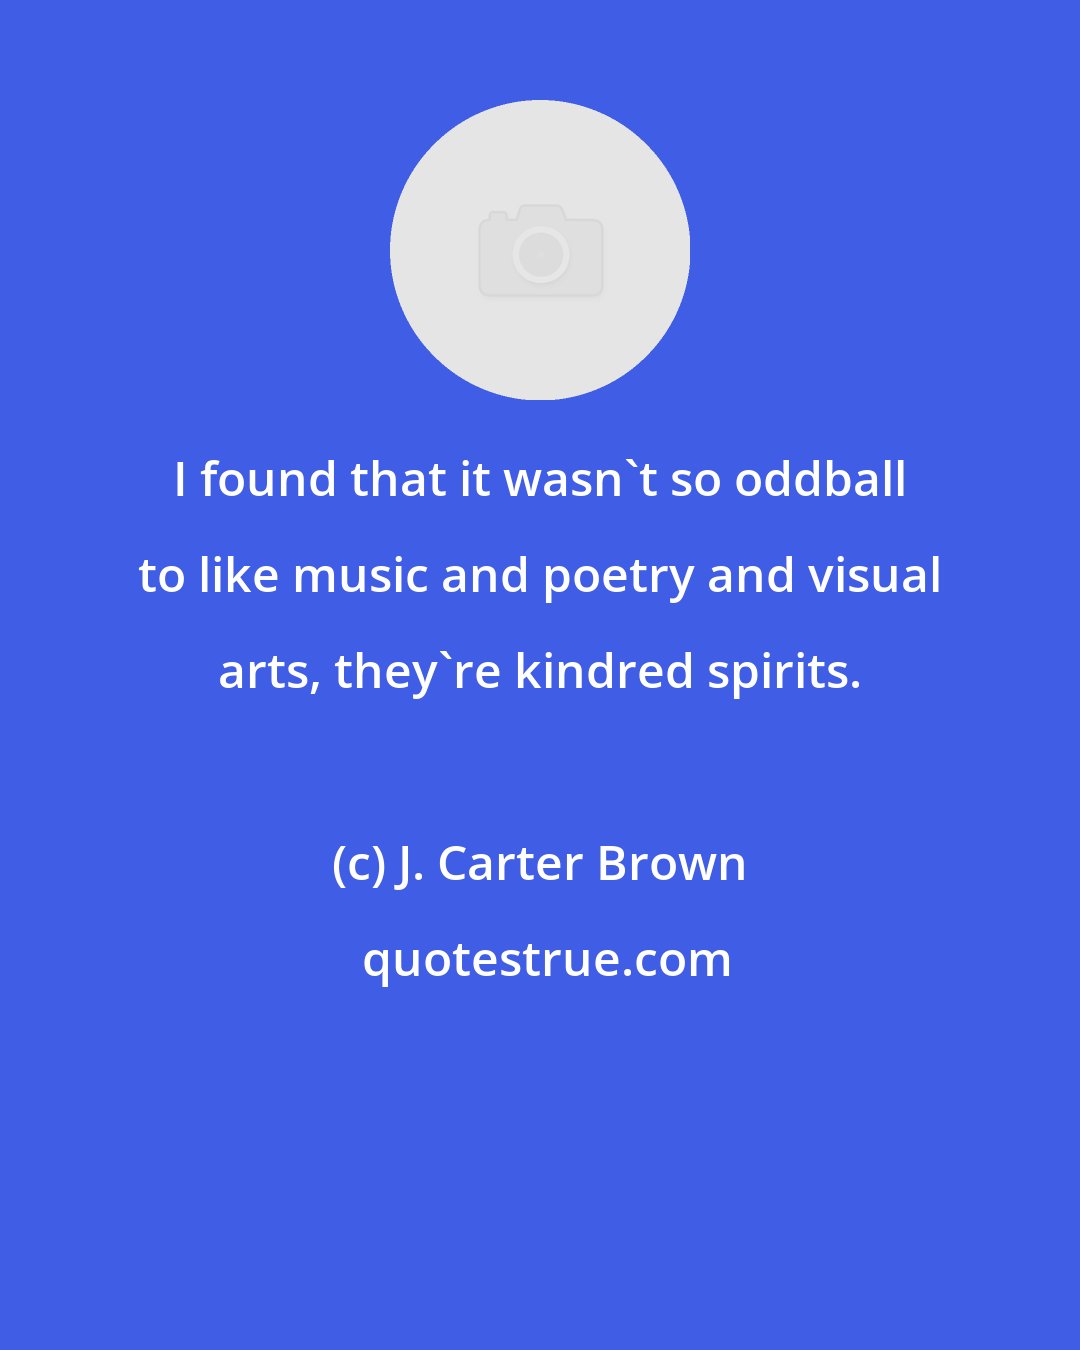 J. Carter Brown: I found that it wasn't so oddball to like music and poetry and visual arts, they're kindred spirits.